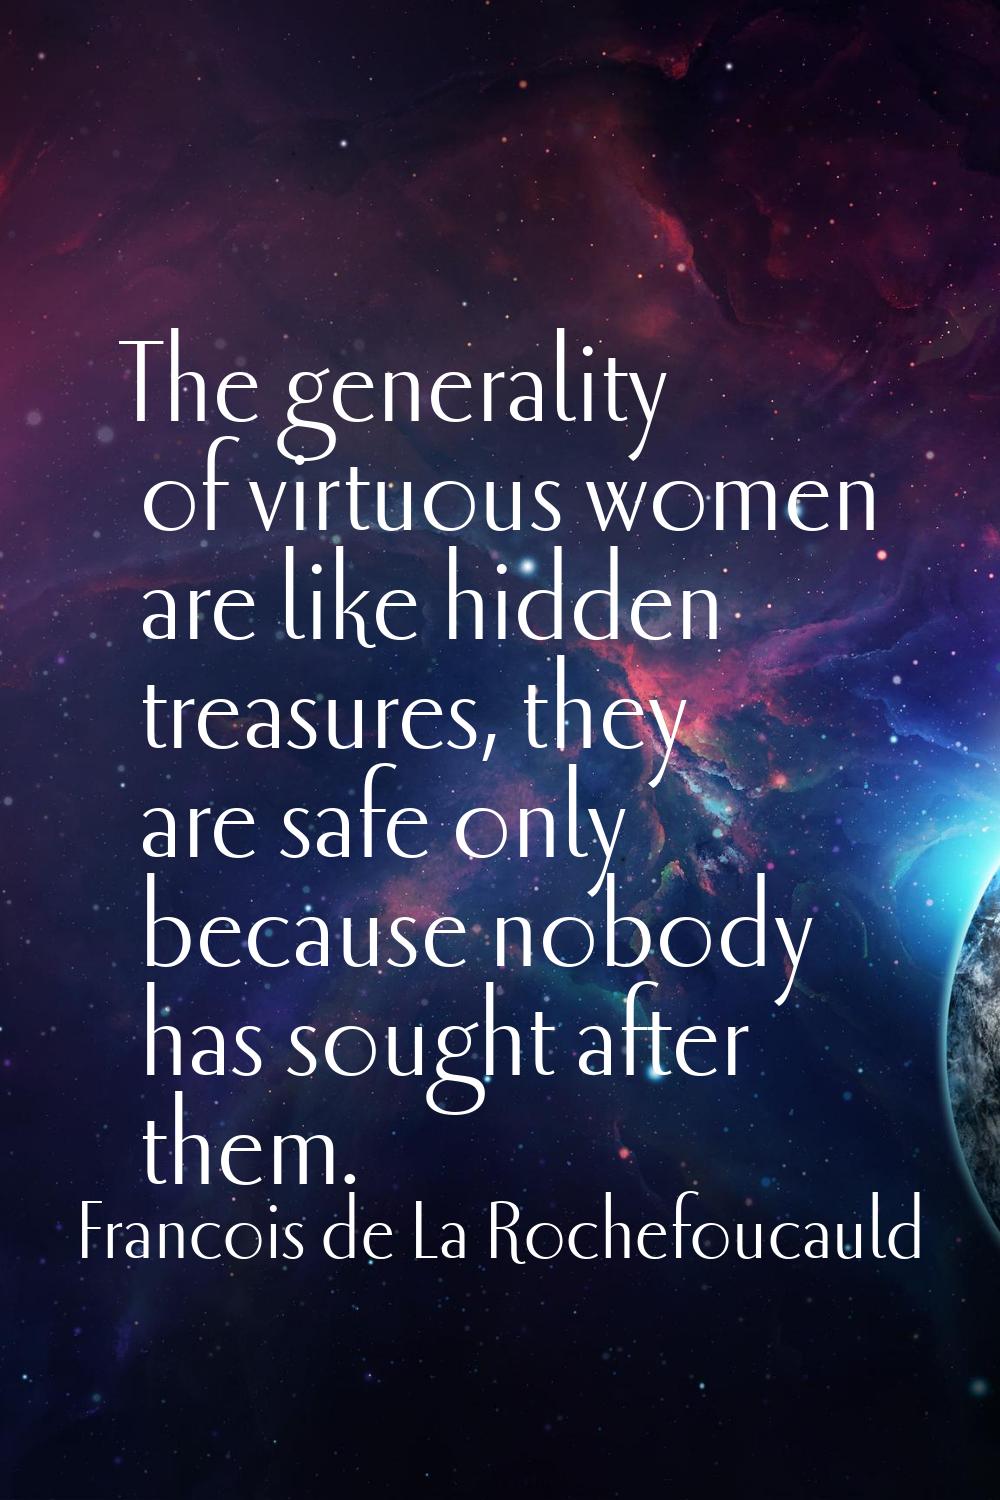 The generality of virtuous women are like hidden treasures, they are safe only because nobody has s